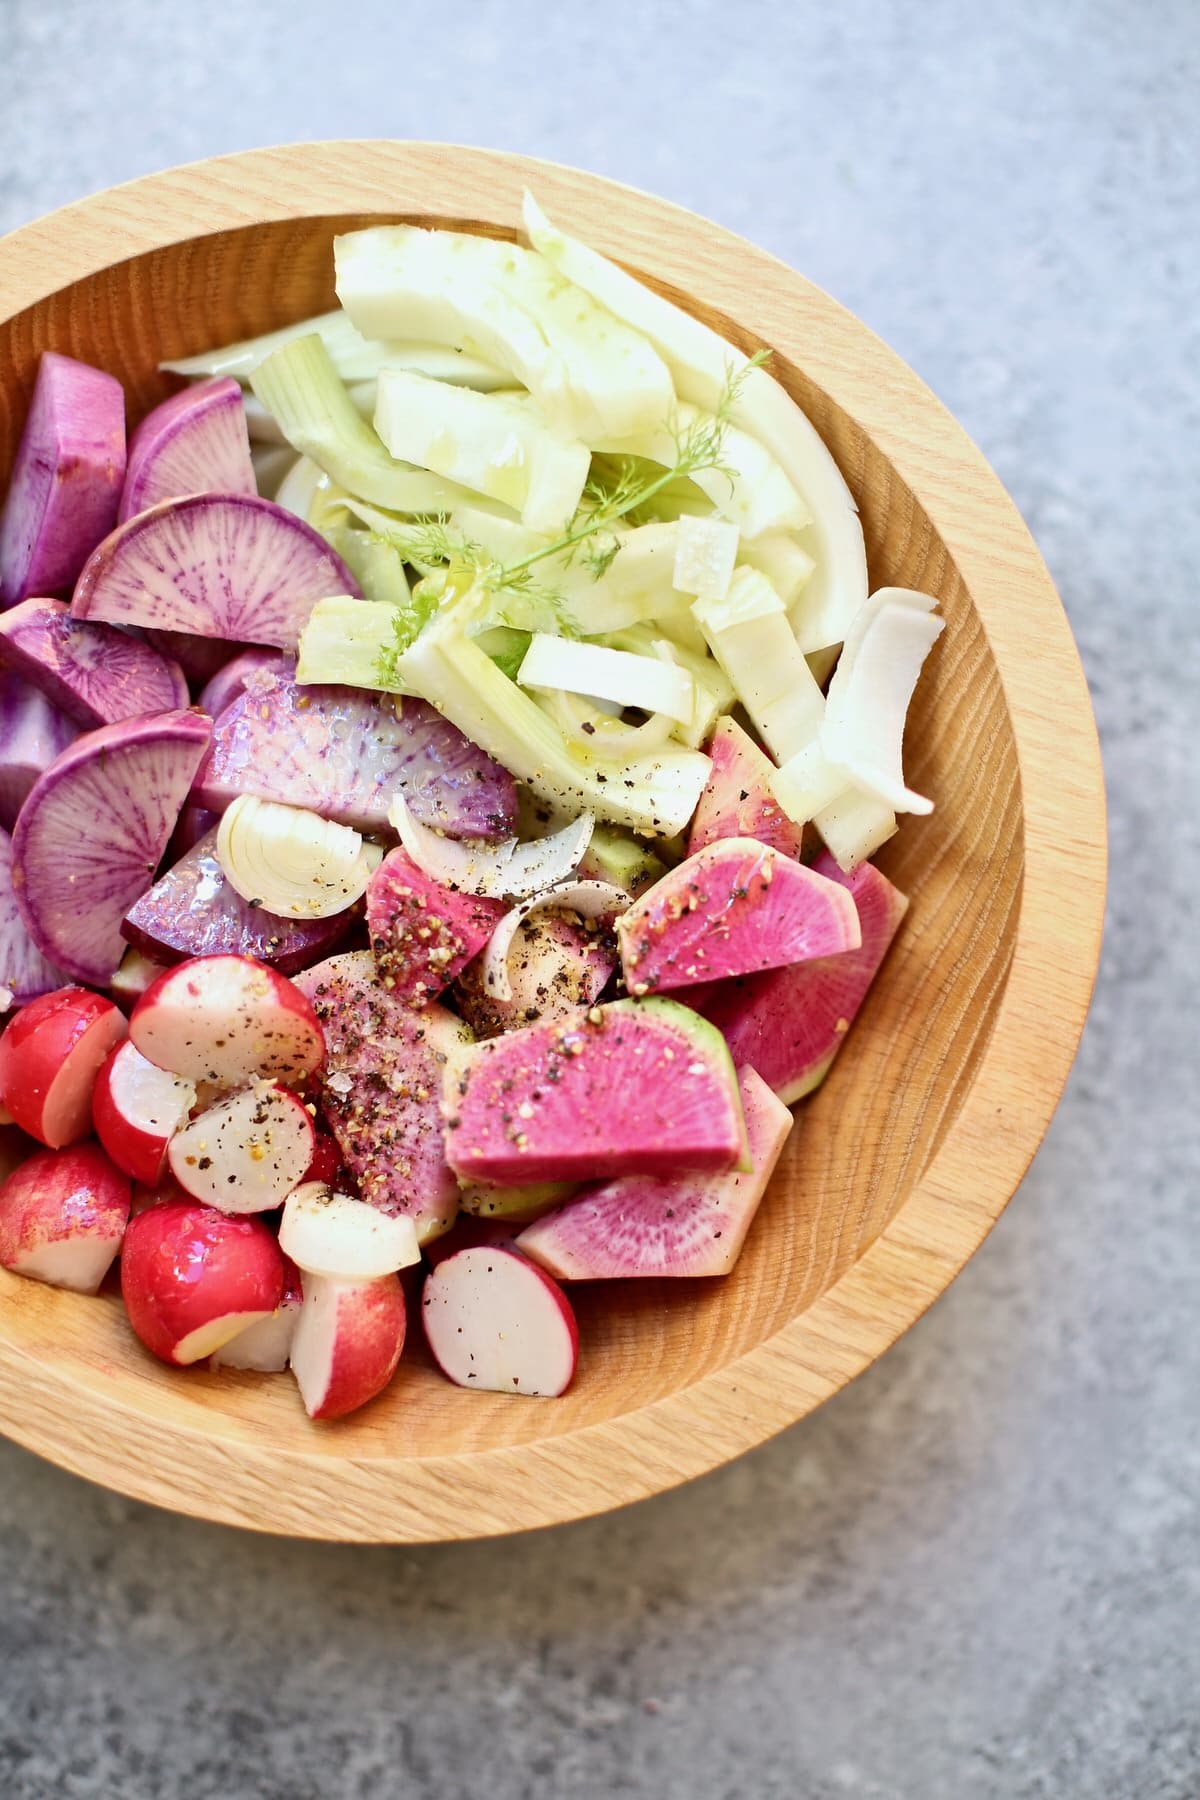 cut vegetables in a wooden bowl